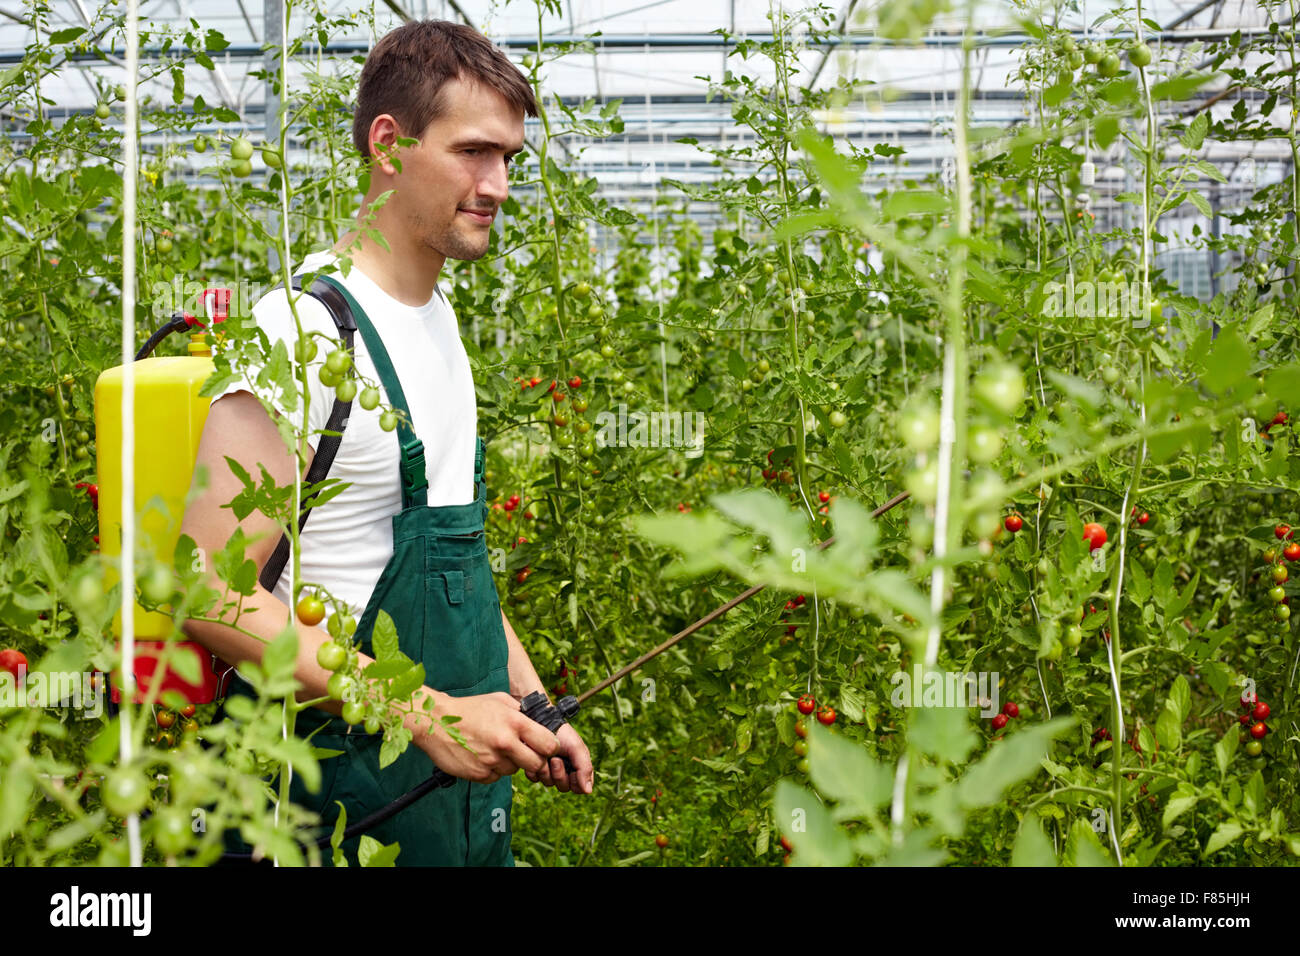 Farmer using organic crop protection agent in greenhouse with tomato plants Stock Photo